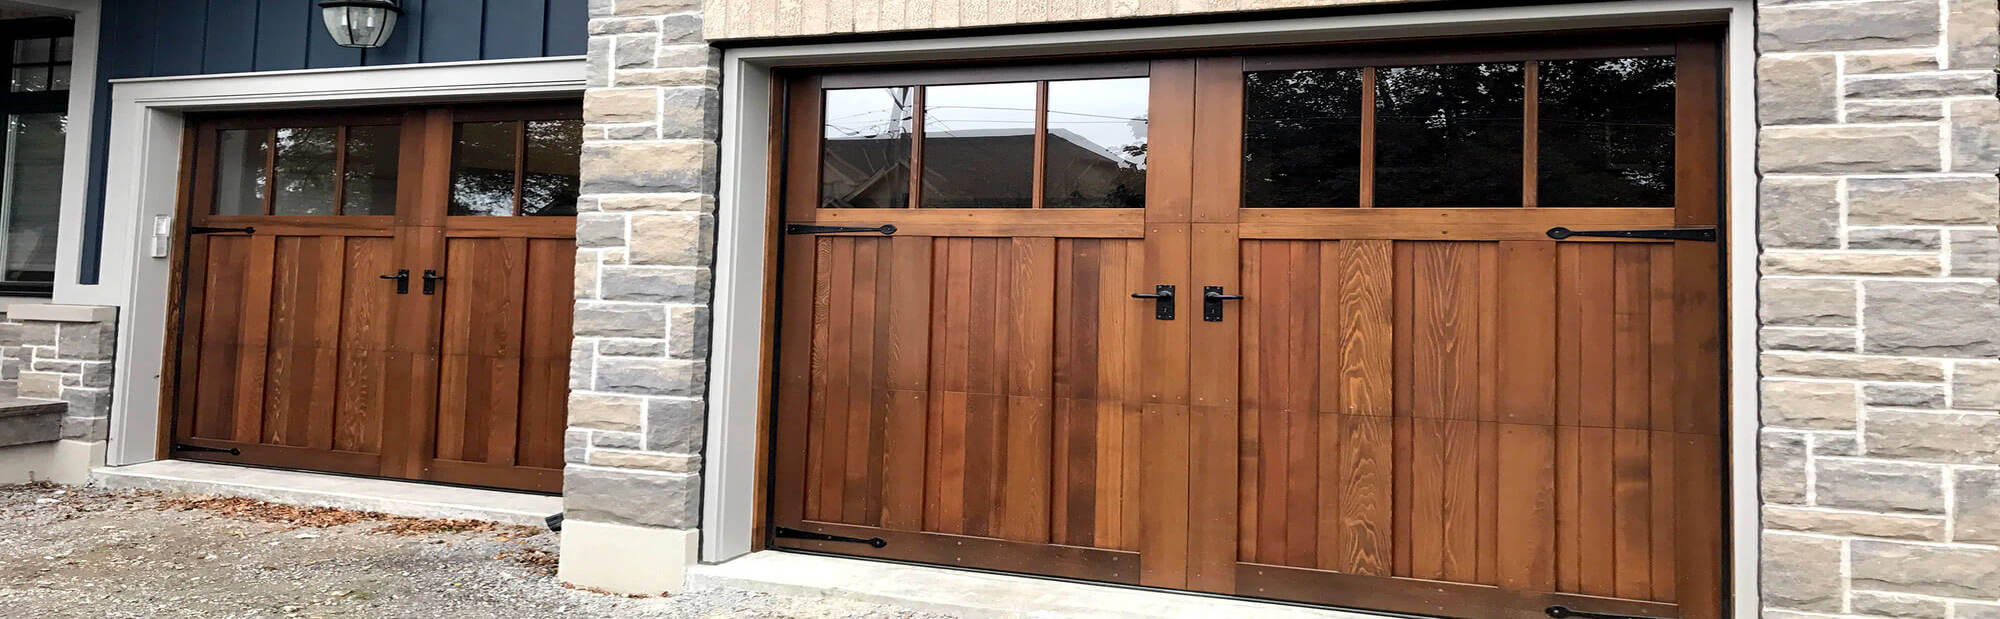 Does your garage door need servicing, repair or a replacement?